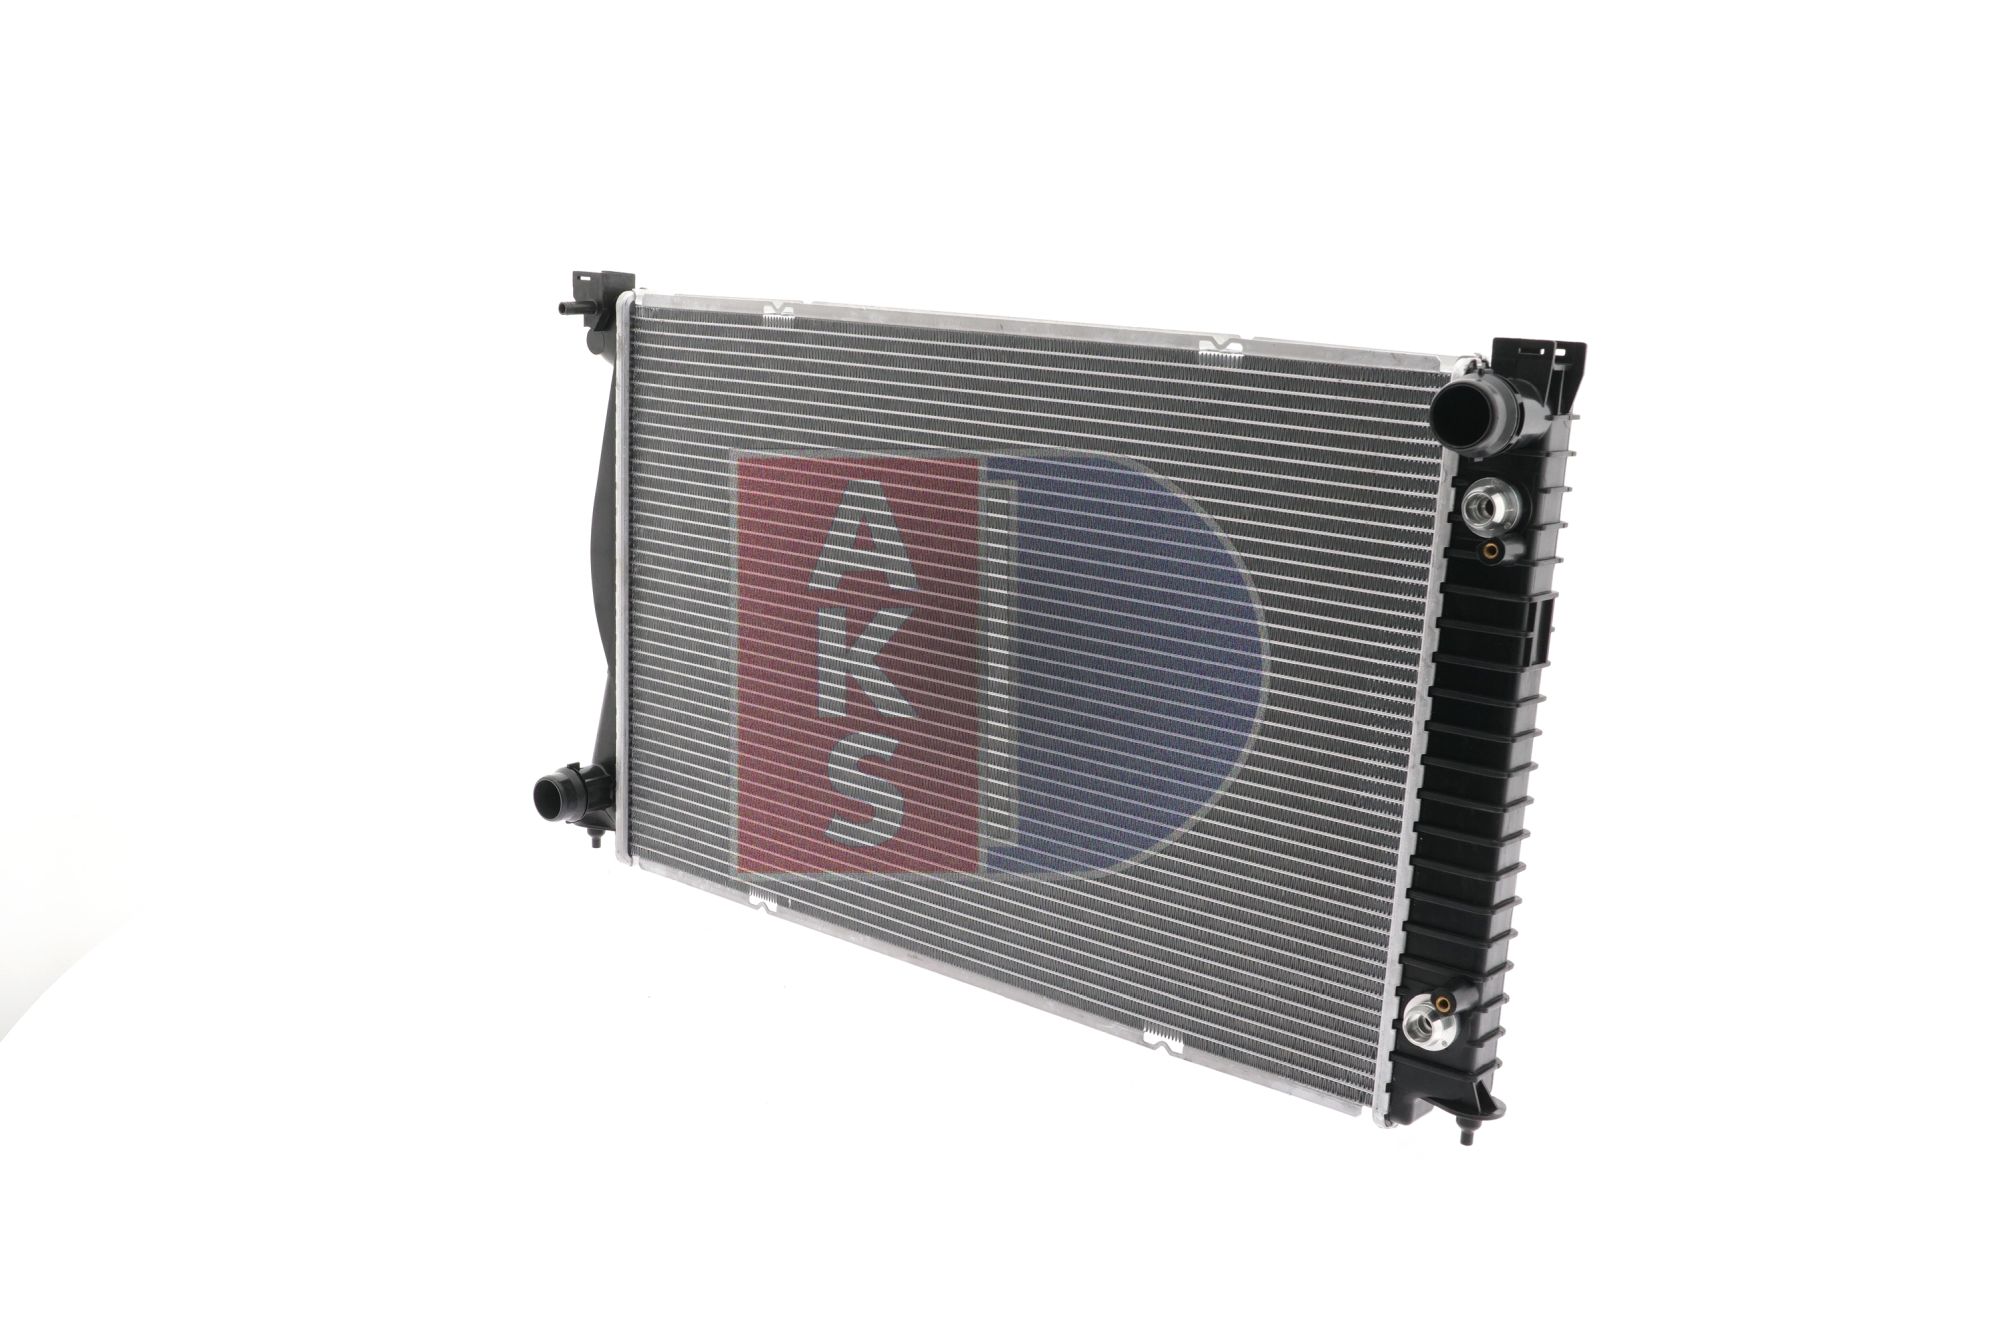 AKS DASIS Aluminium, for vehicles with air conditioning, 675 x 445 x 32 mm, Automatic Transmission, Brazed cooling fins Radiator 480063N buy